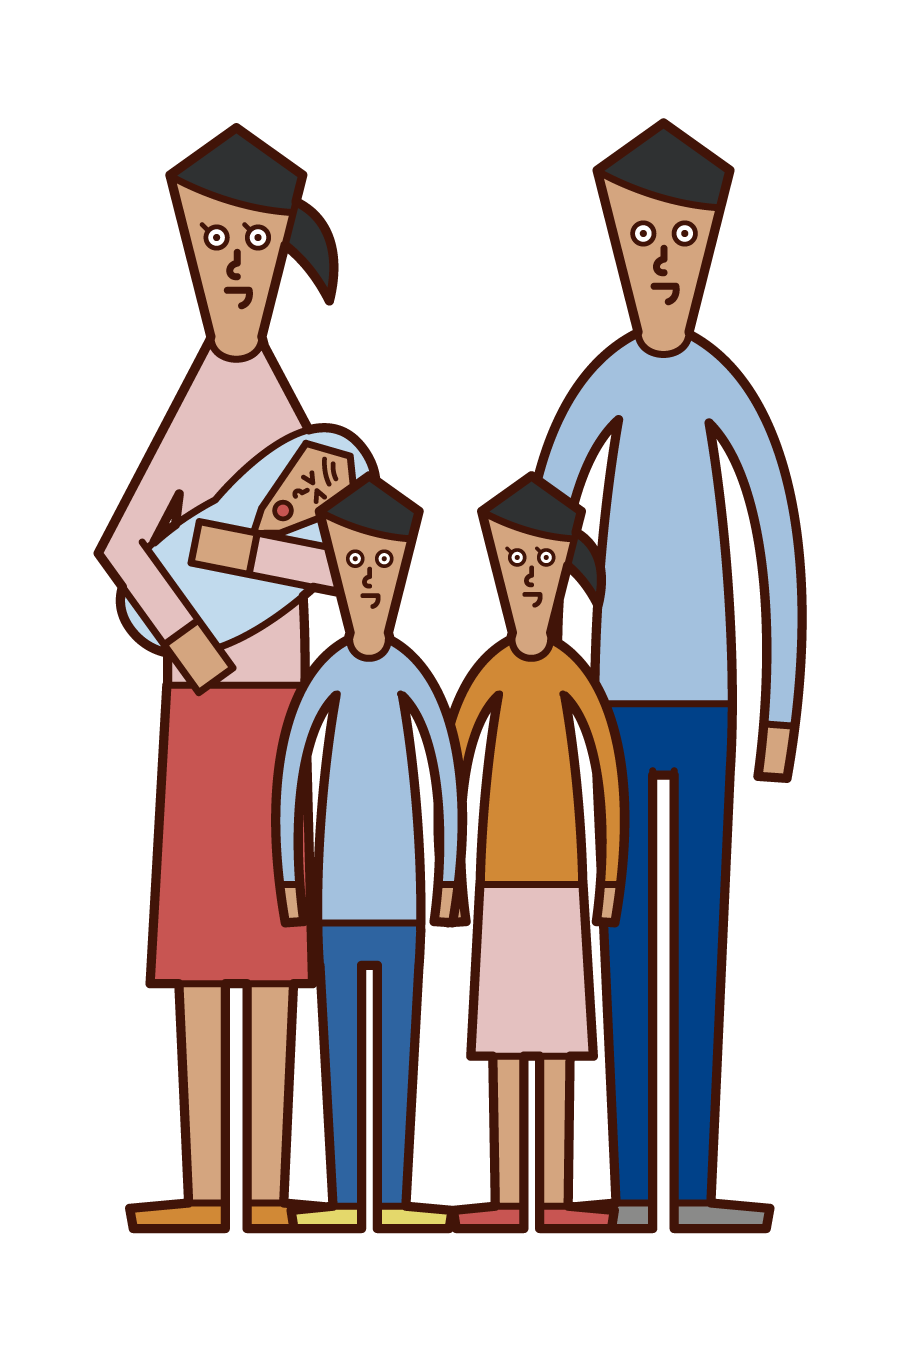 Illustration of a family of five